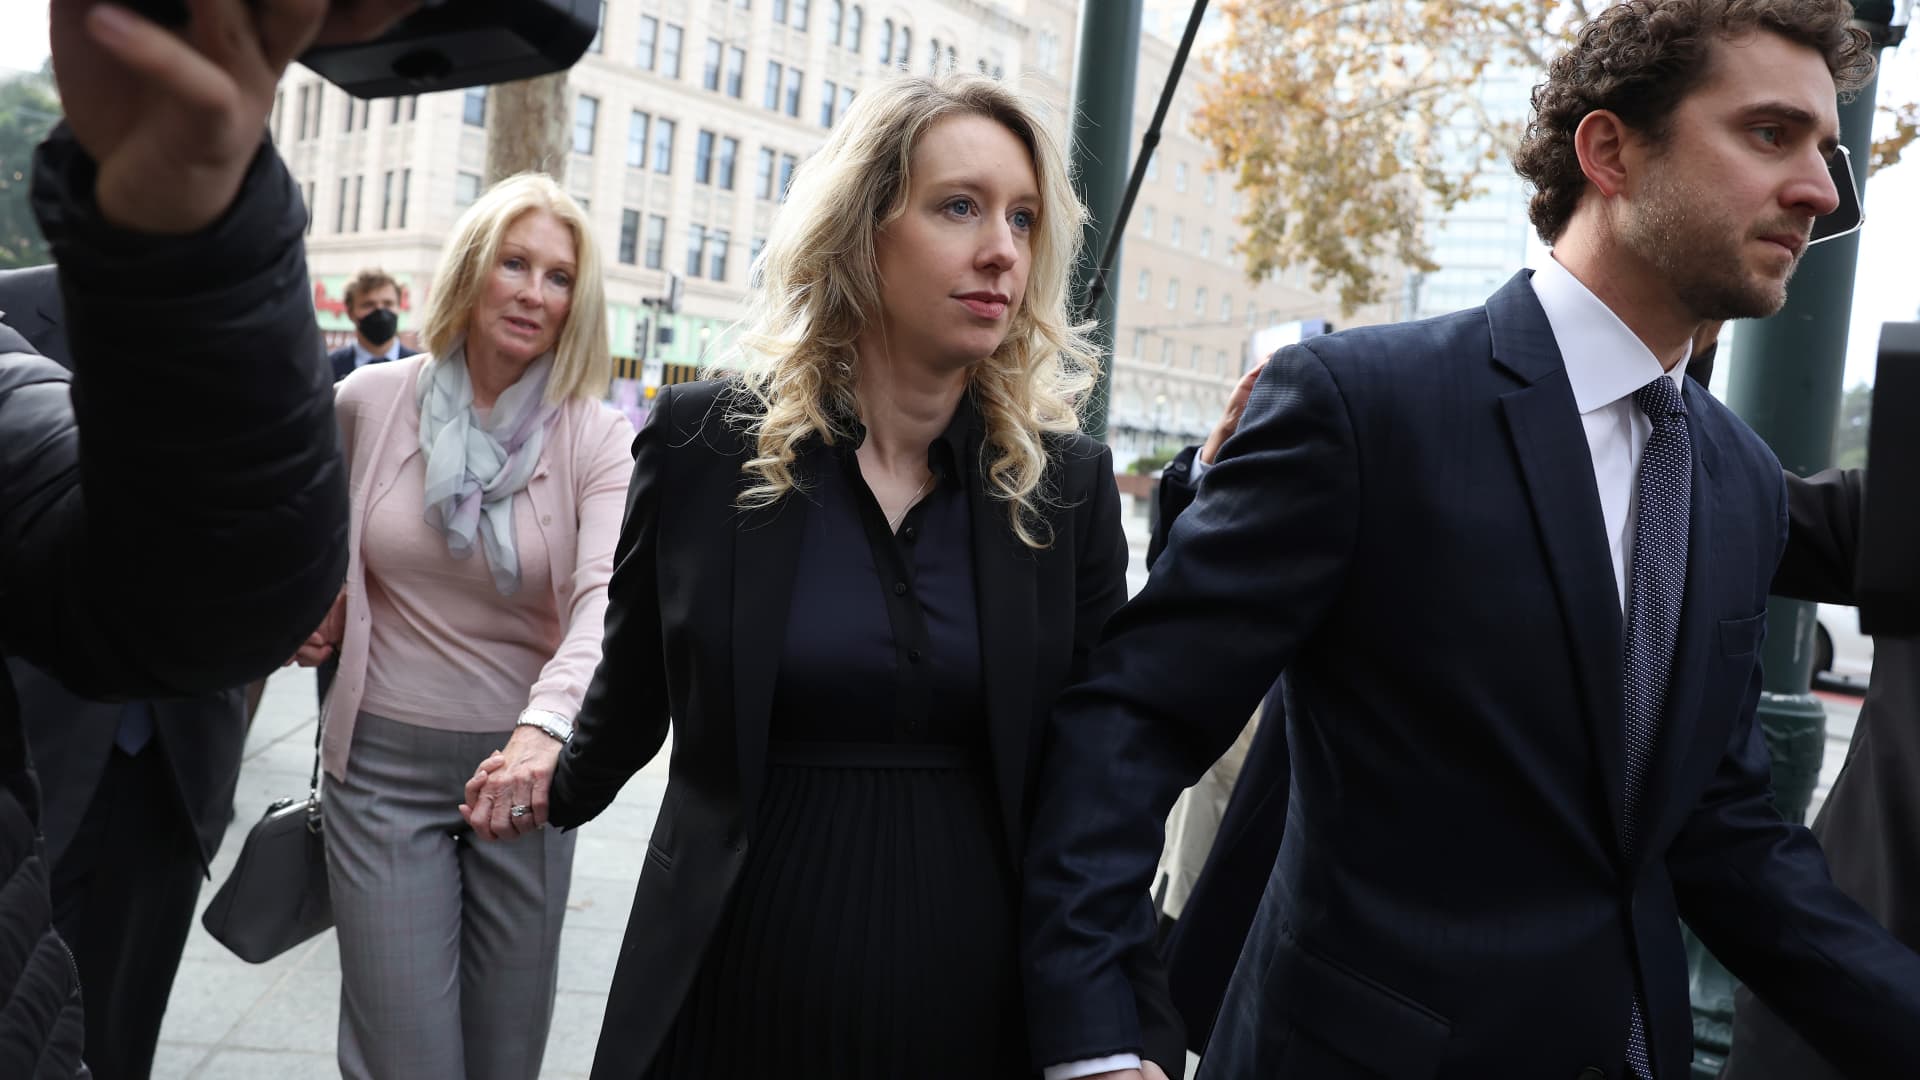 Theranos founder Elizabeth Holmes sentenced to more than 11 years in prison